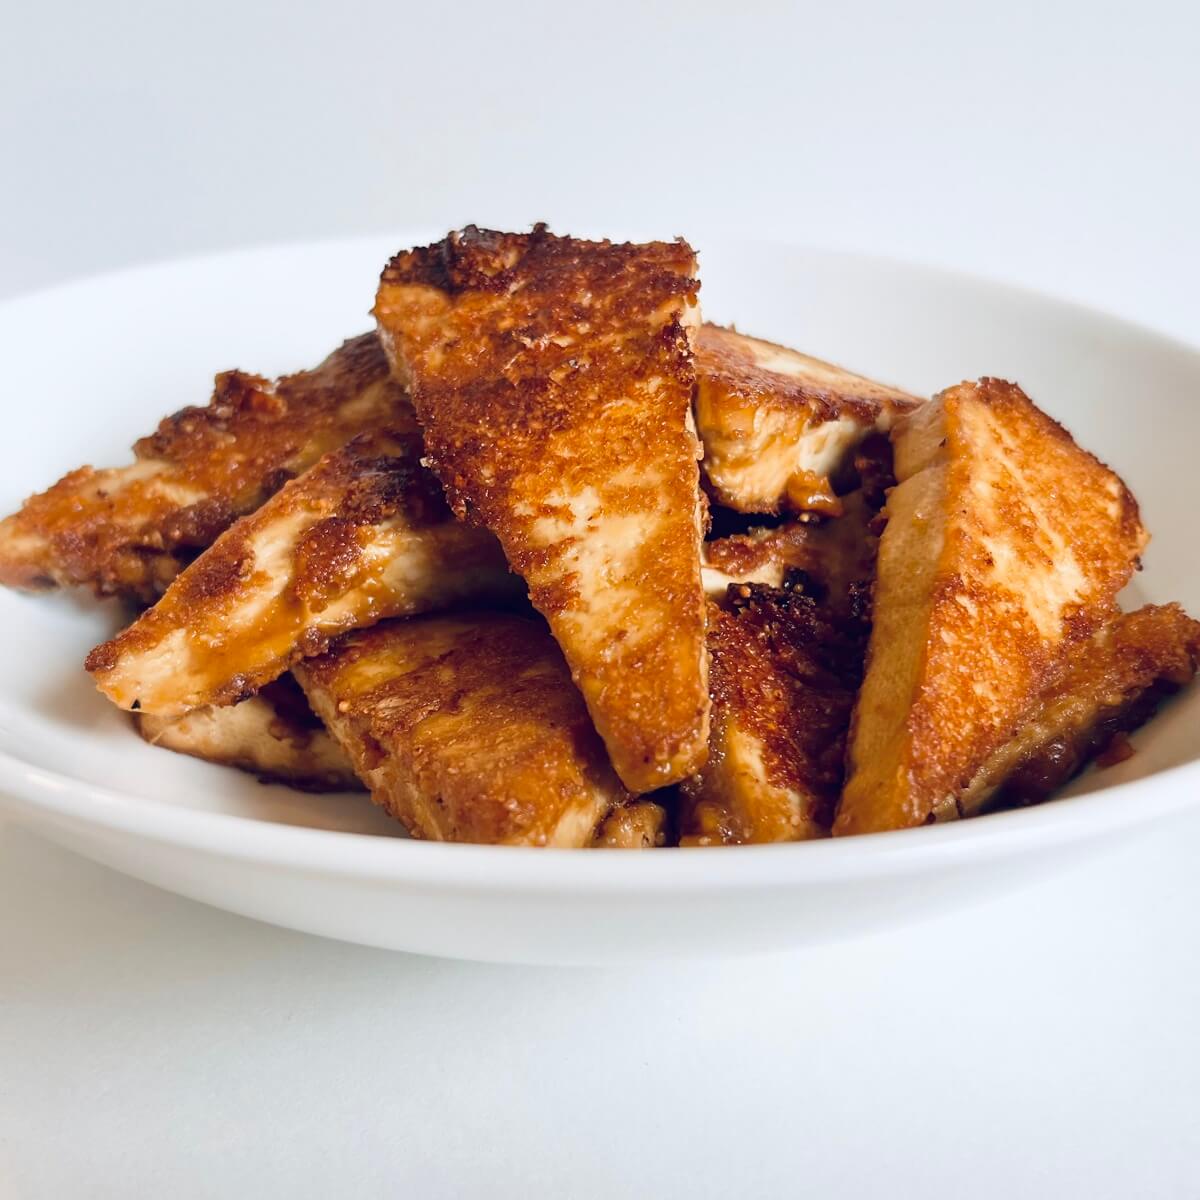 Triangular cut cooked marinated tofu pieces in a bowl.